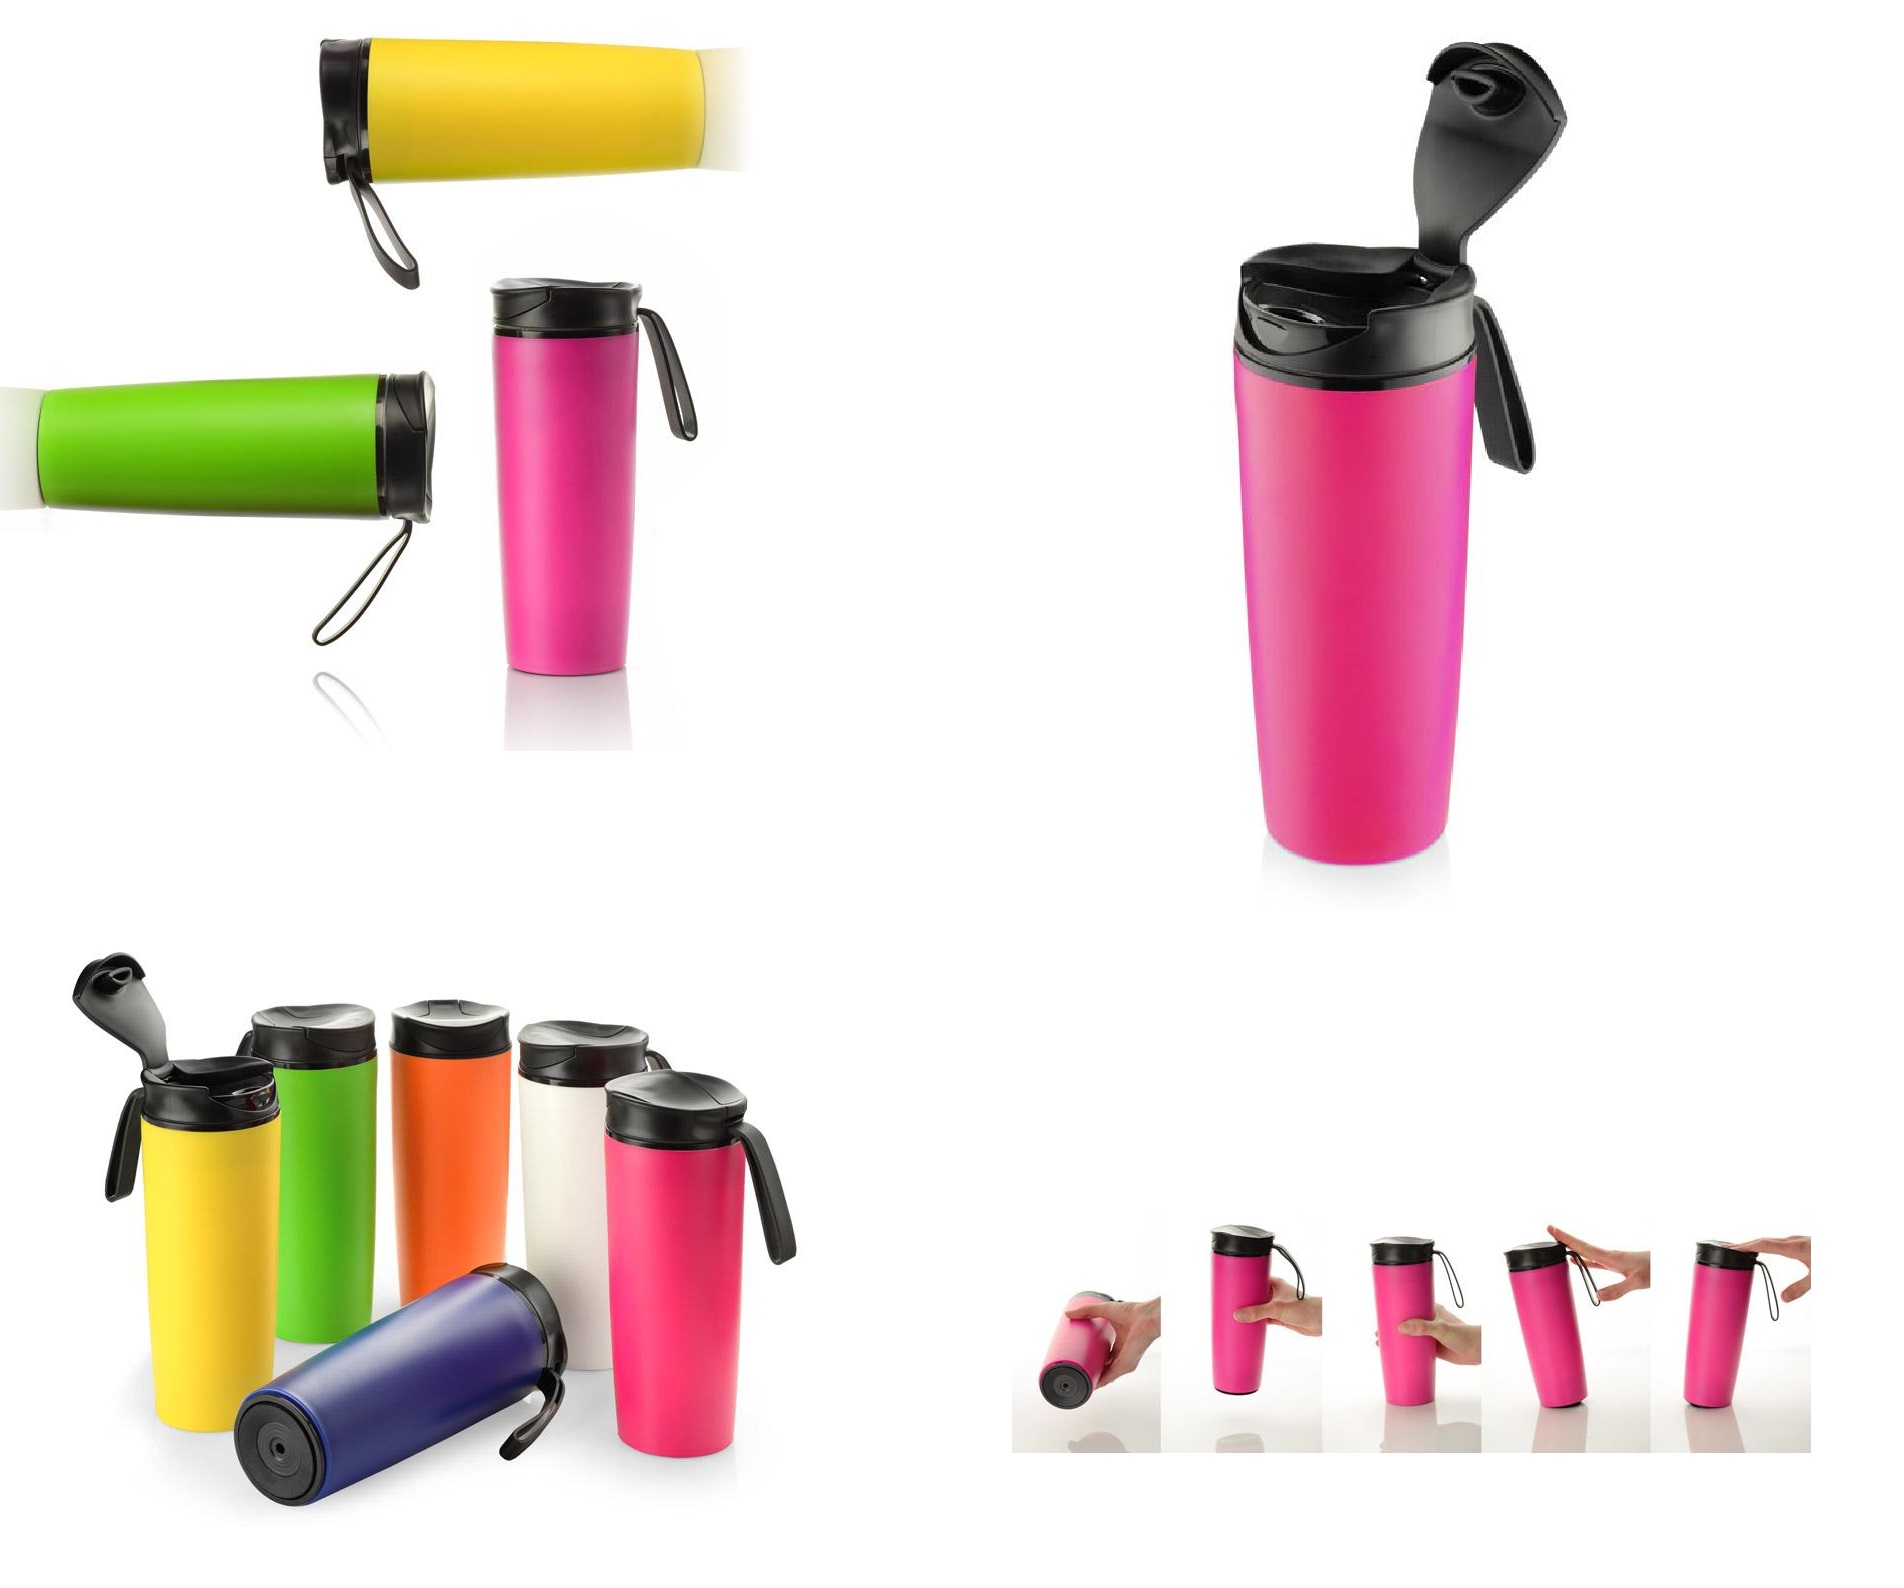 Colored thermo mugs "Colorissimo" with logo